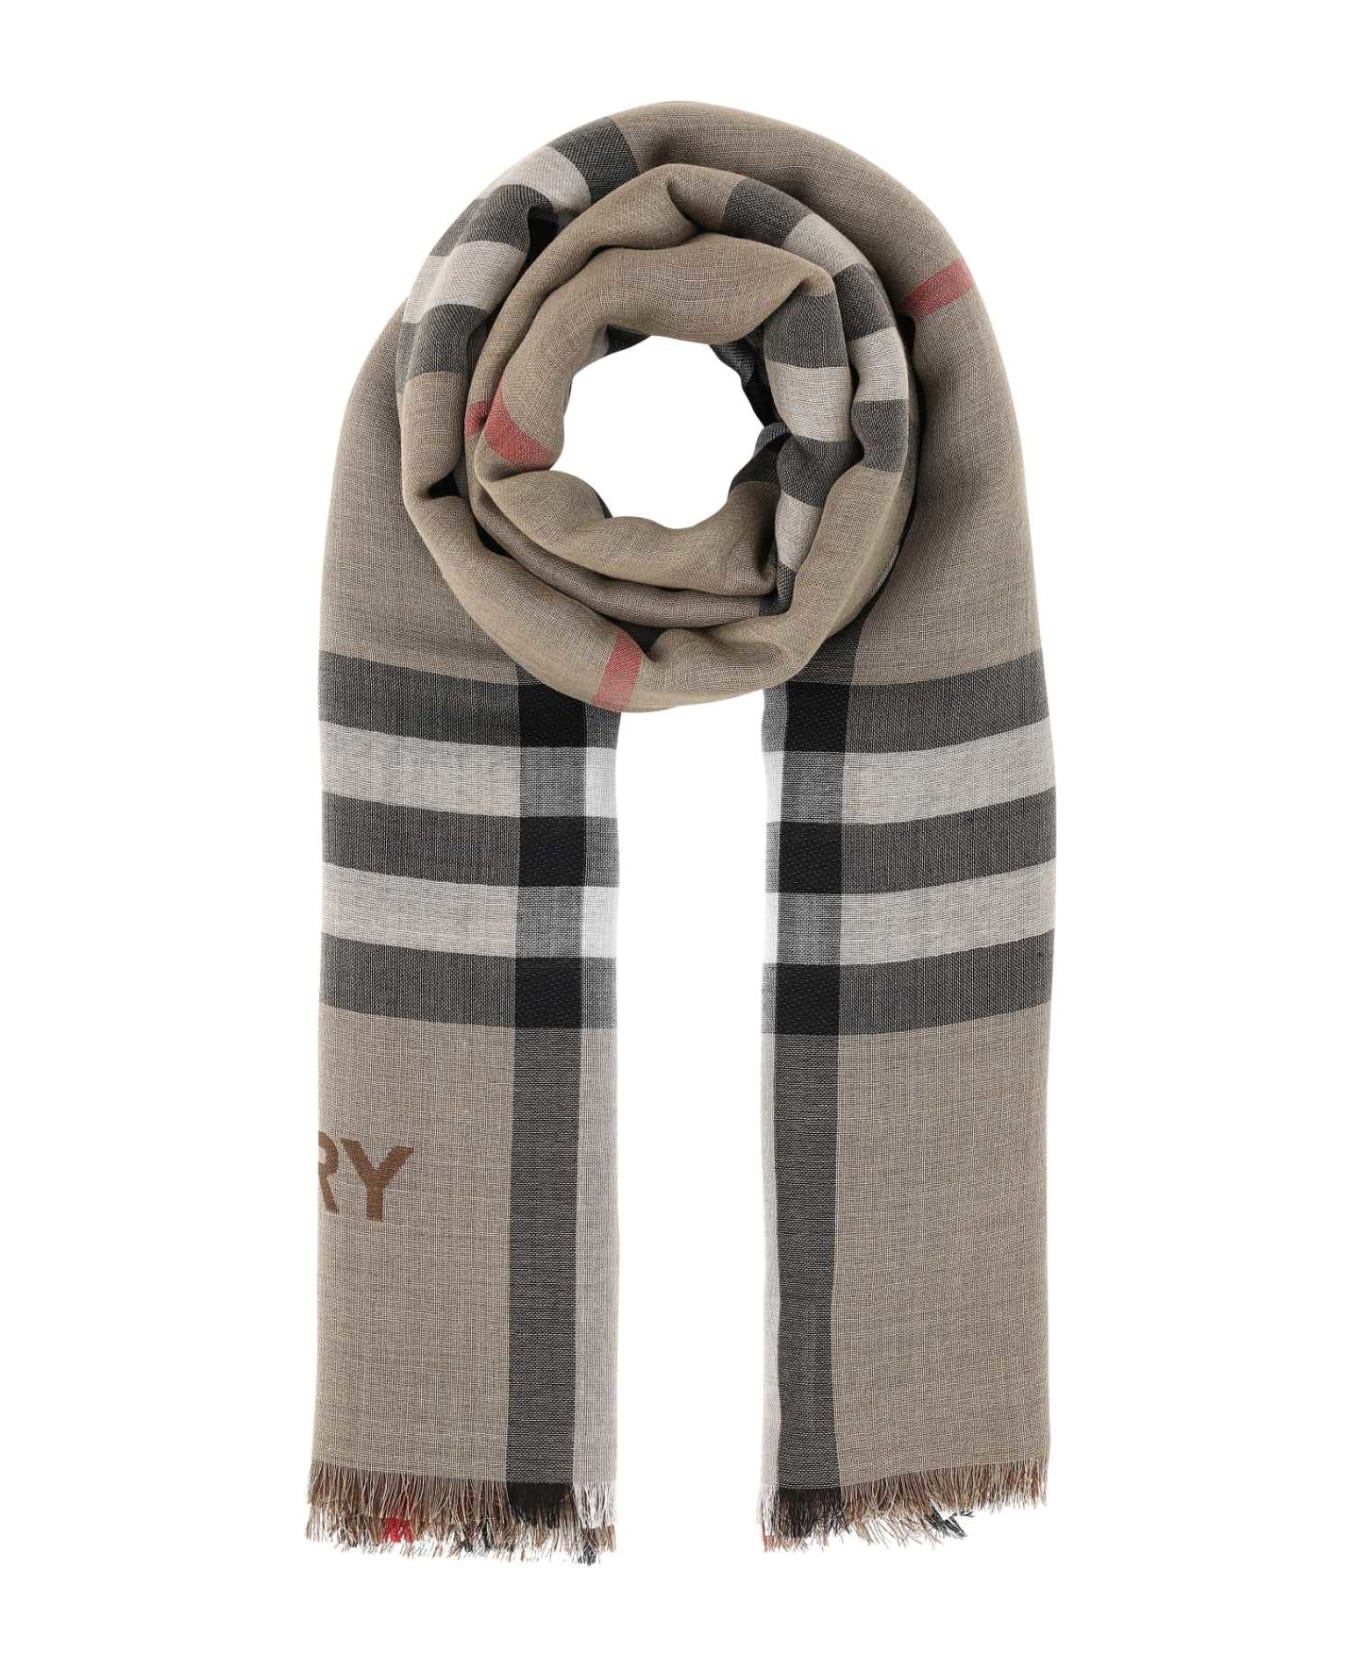 Burberry Embroidered Wool Blend Scarf - ARCHIVEBEIGE スカーフ